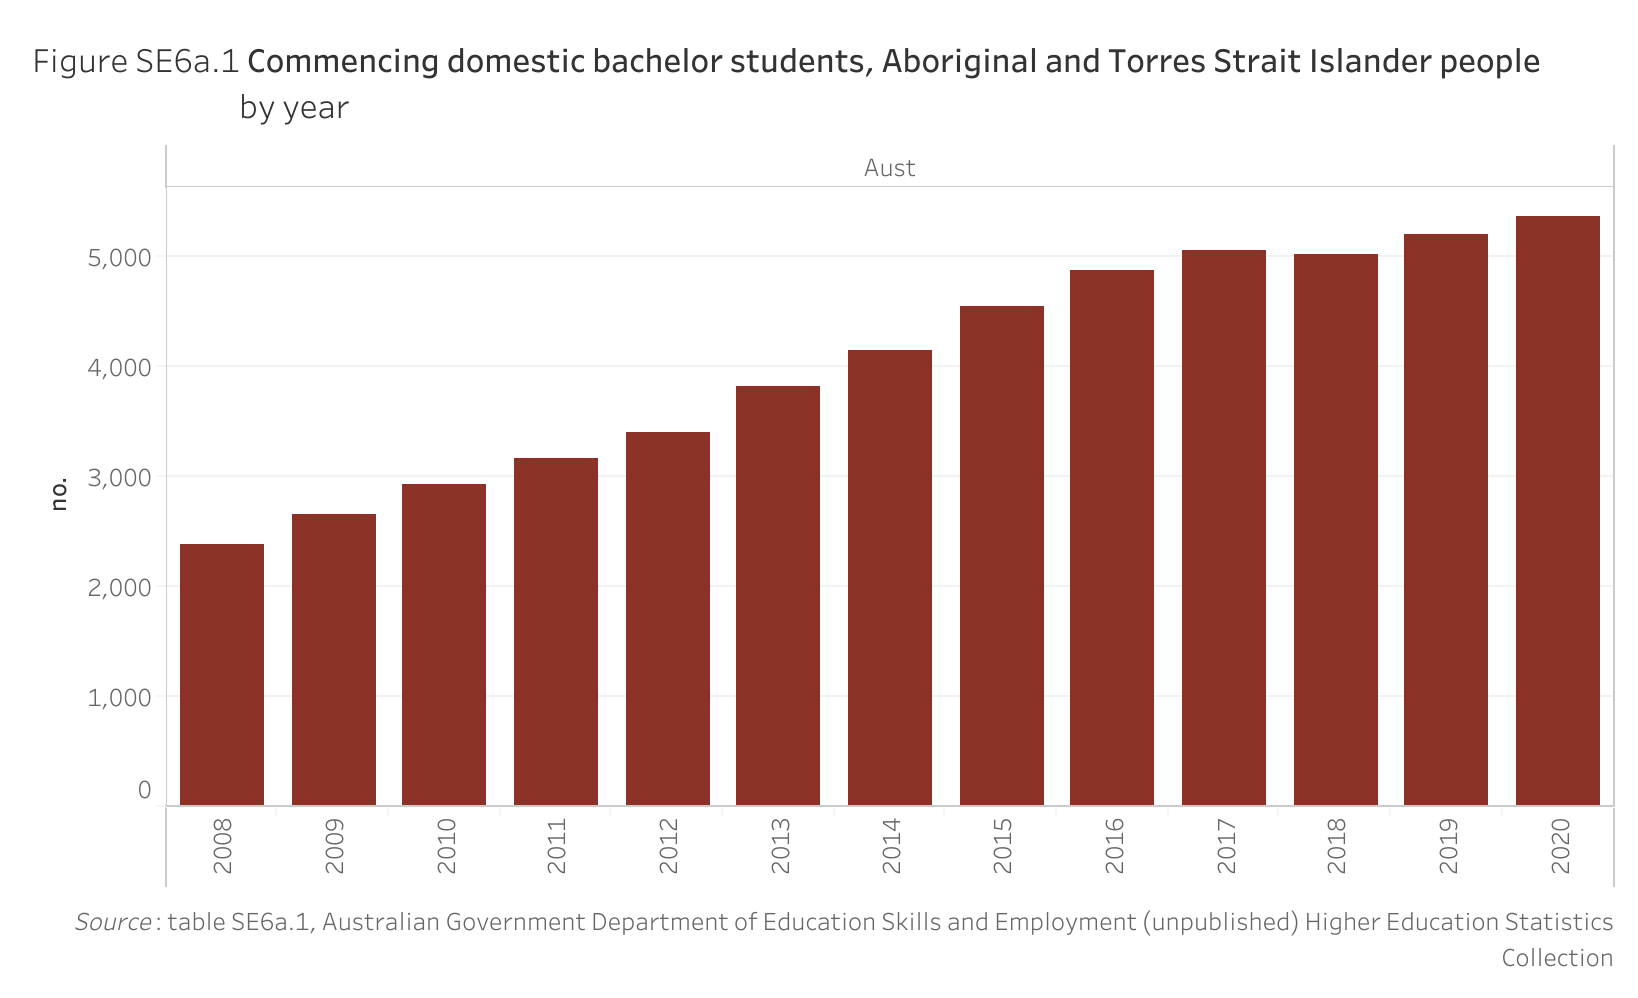 Figure SE6a.1. Bar chart showing the number of Aboriginal and Torres Strait Islander people who are commencing domestic bachelor students in Australia, by year. Data table of figure of SE6a.1 is below.